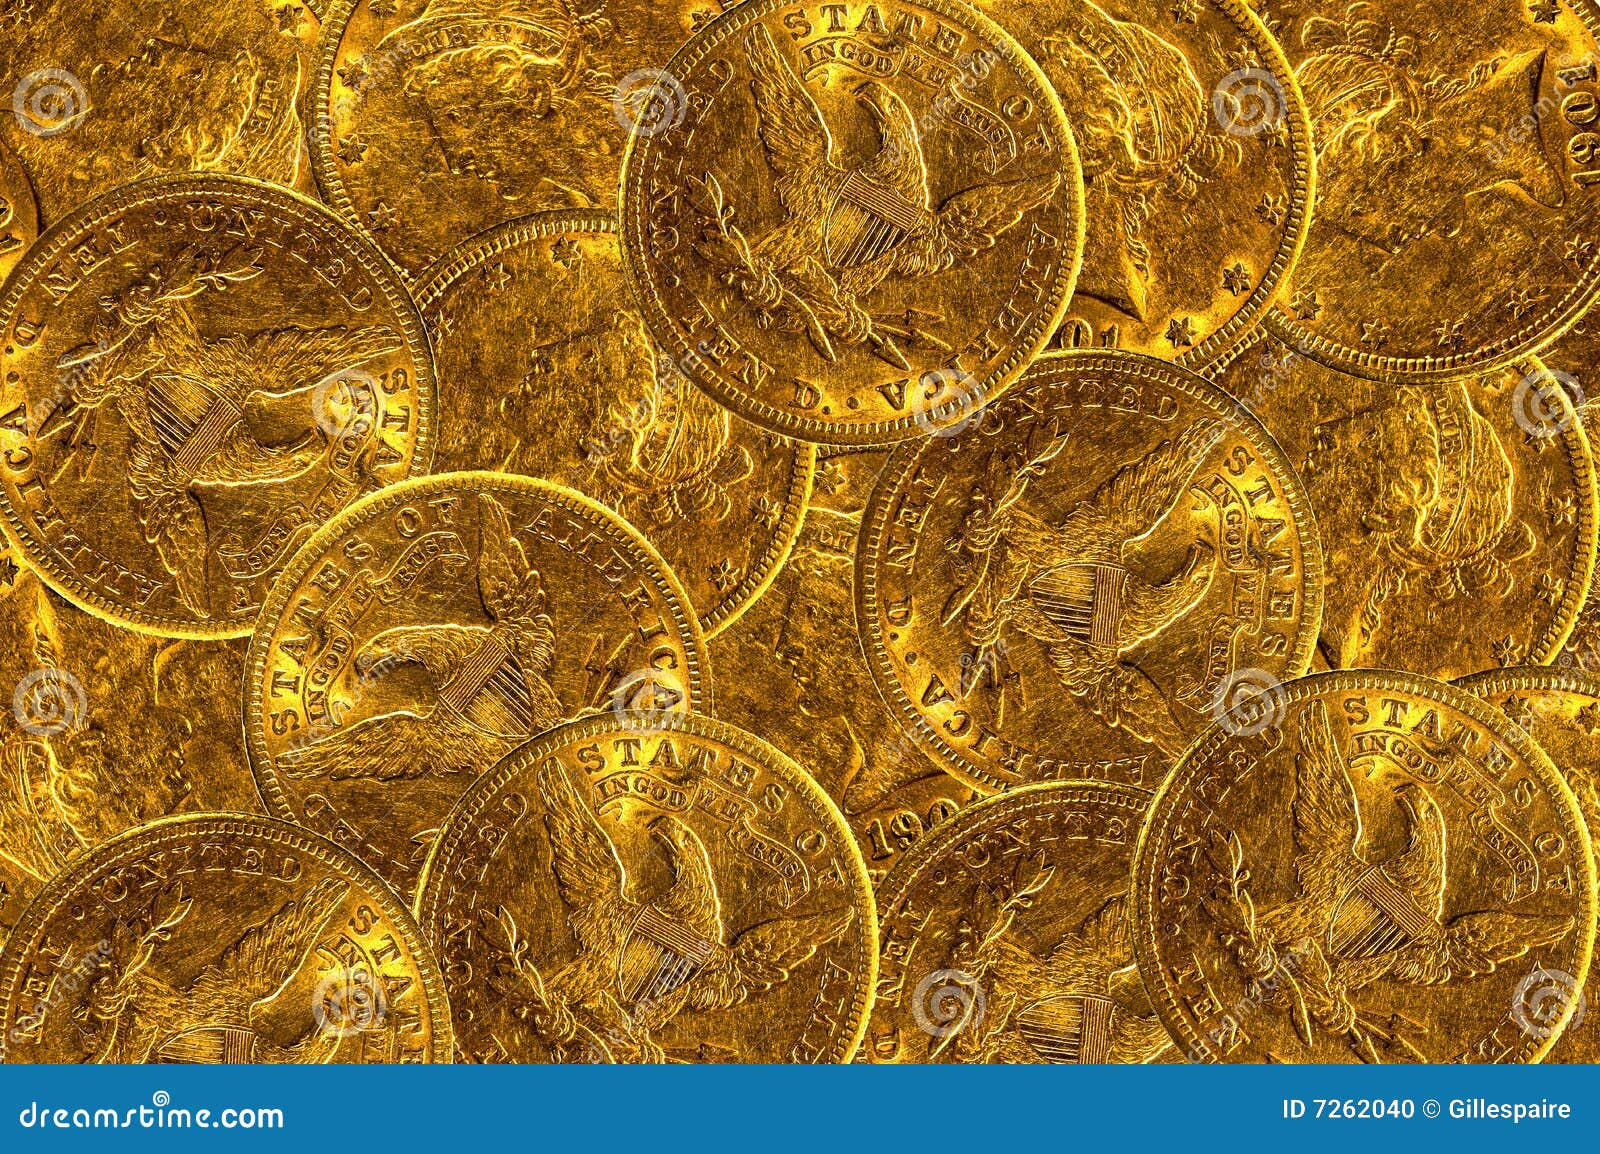 Gold Coins Background stock photo. Image of coin, loan - 7262040